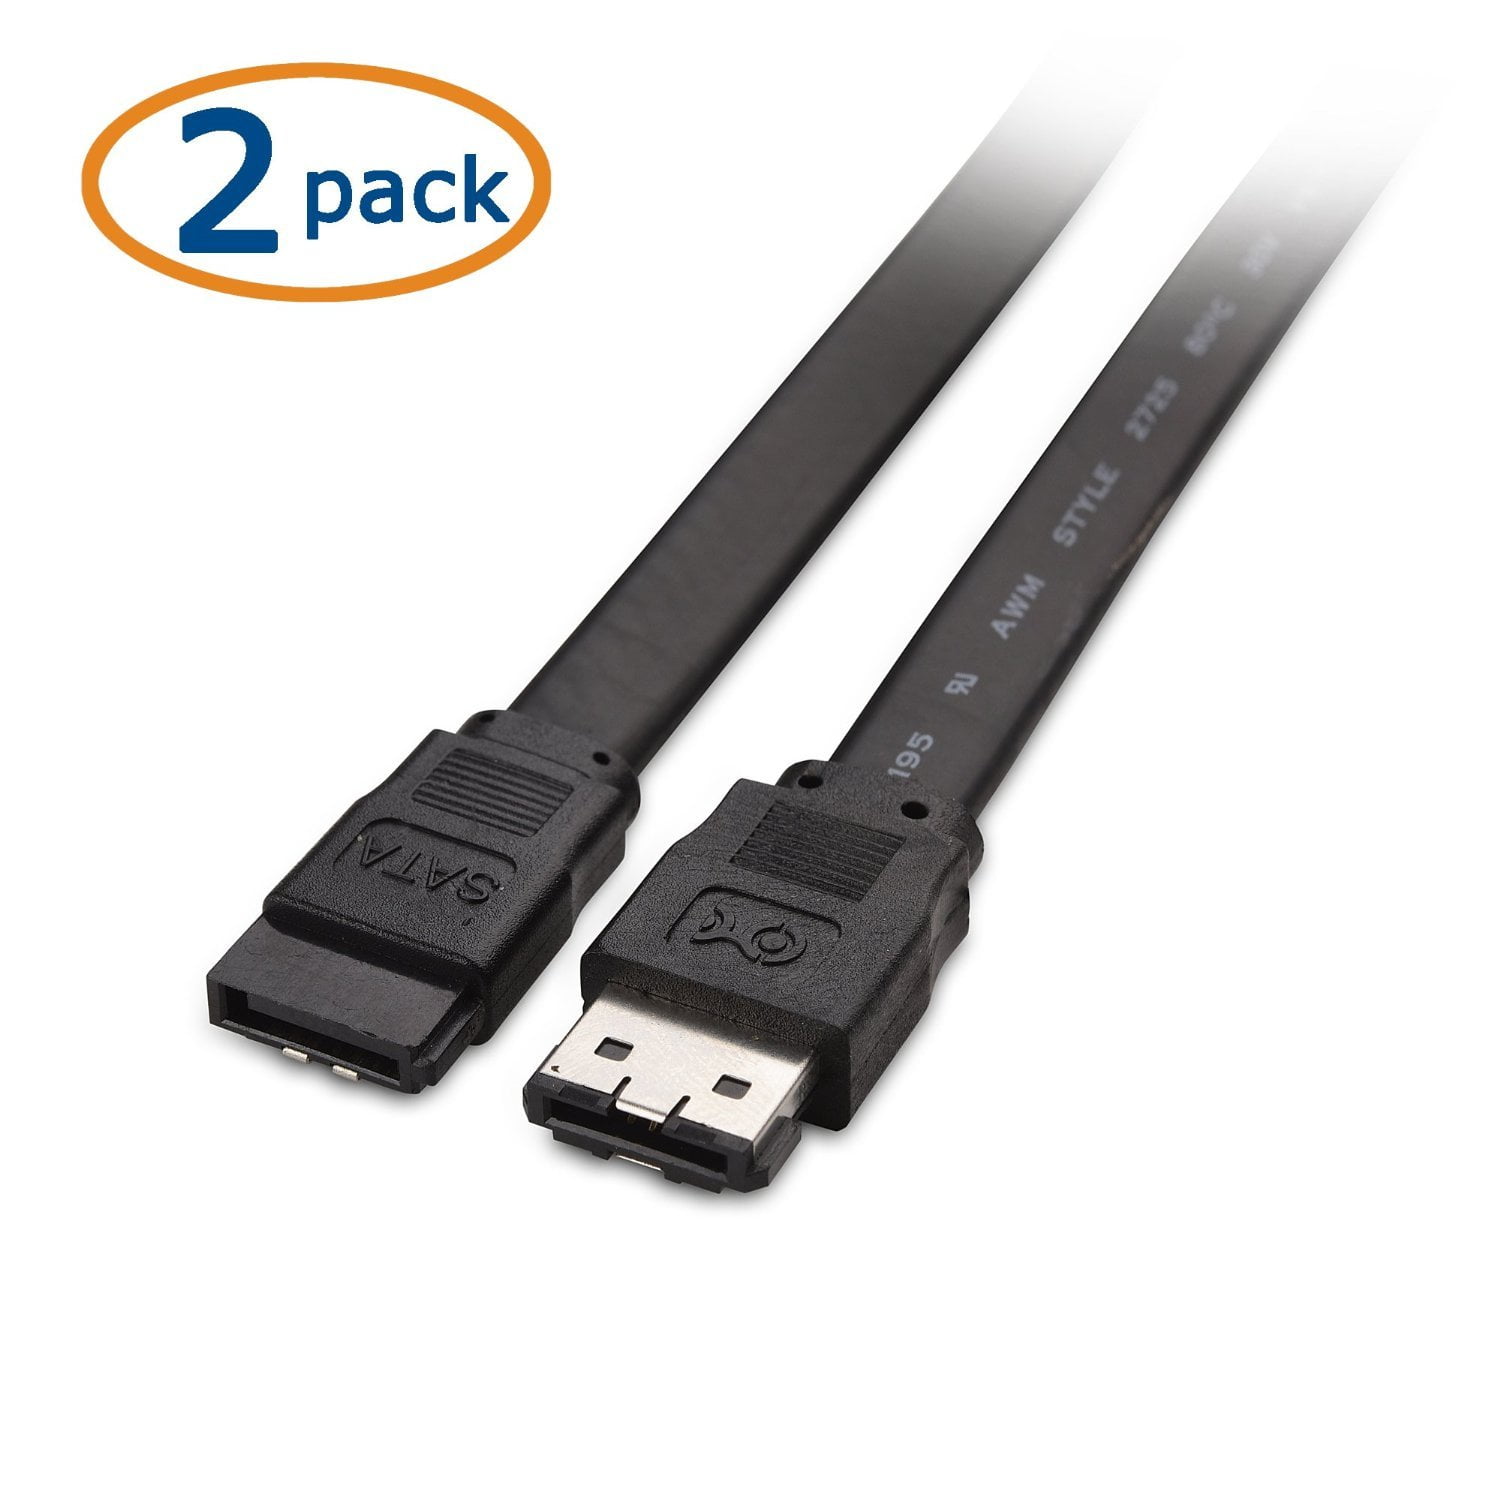 Mediasonic SATA to USB Cable – USB 3.0 / USB 3.1 Gen 1 to 2.5” SATA SSD /  Hard Drive Adapter Cable (Optimized for SSD, Support UASP and SATA 3  6.0Gbps